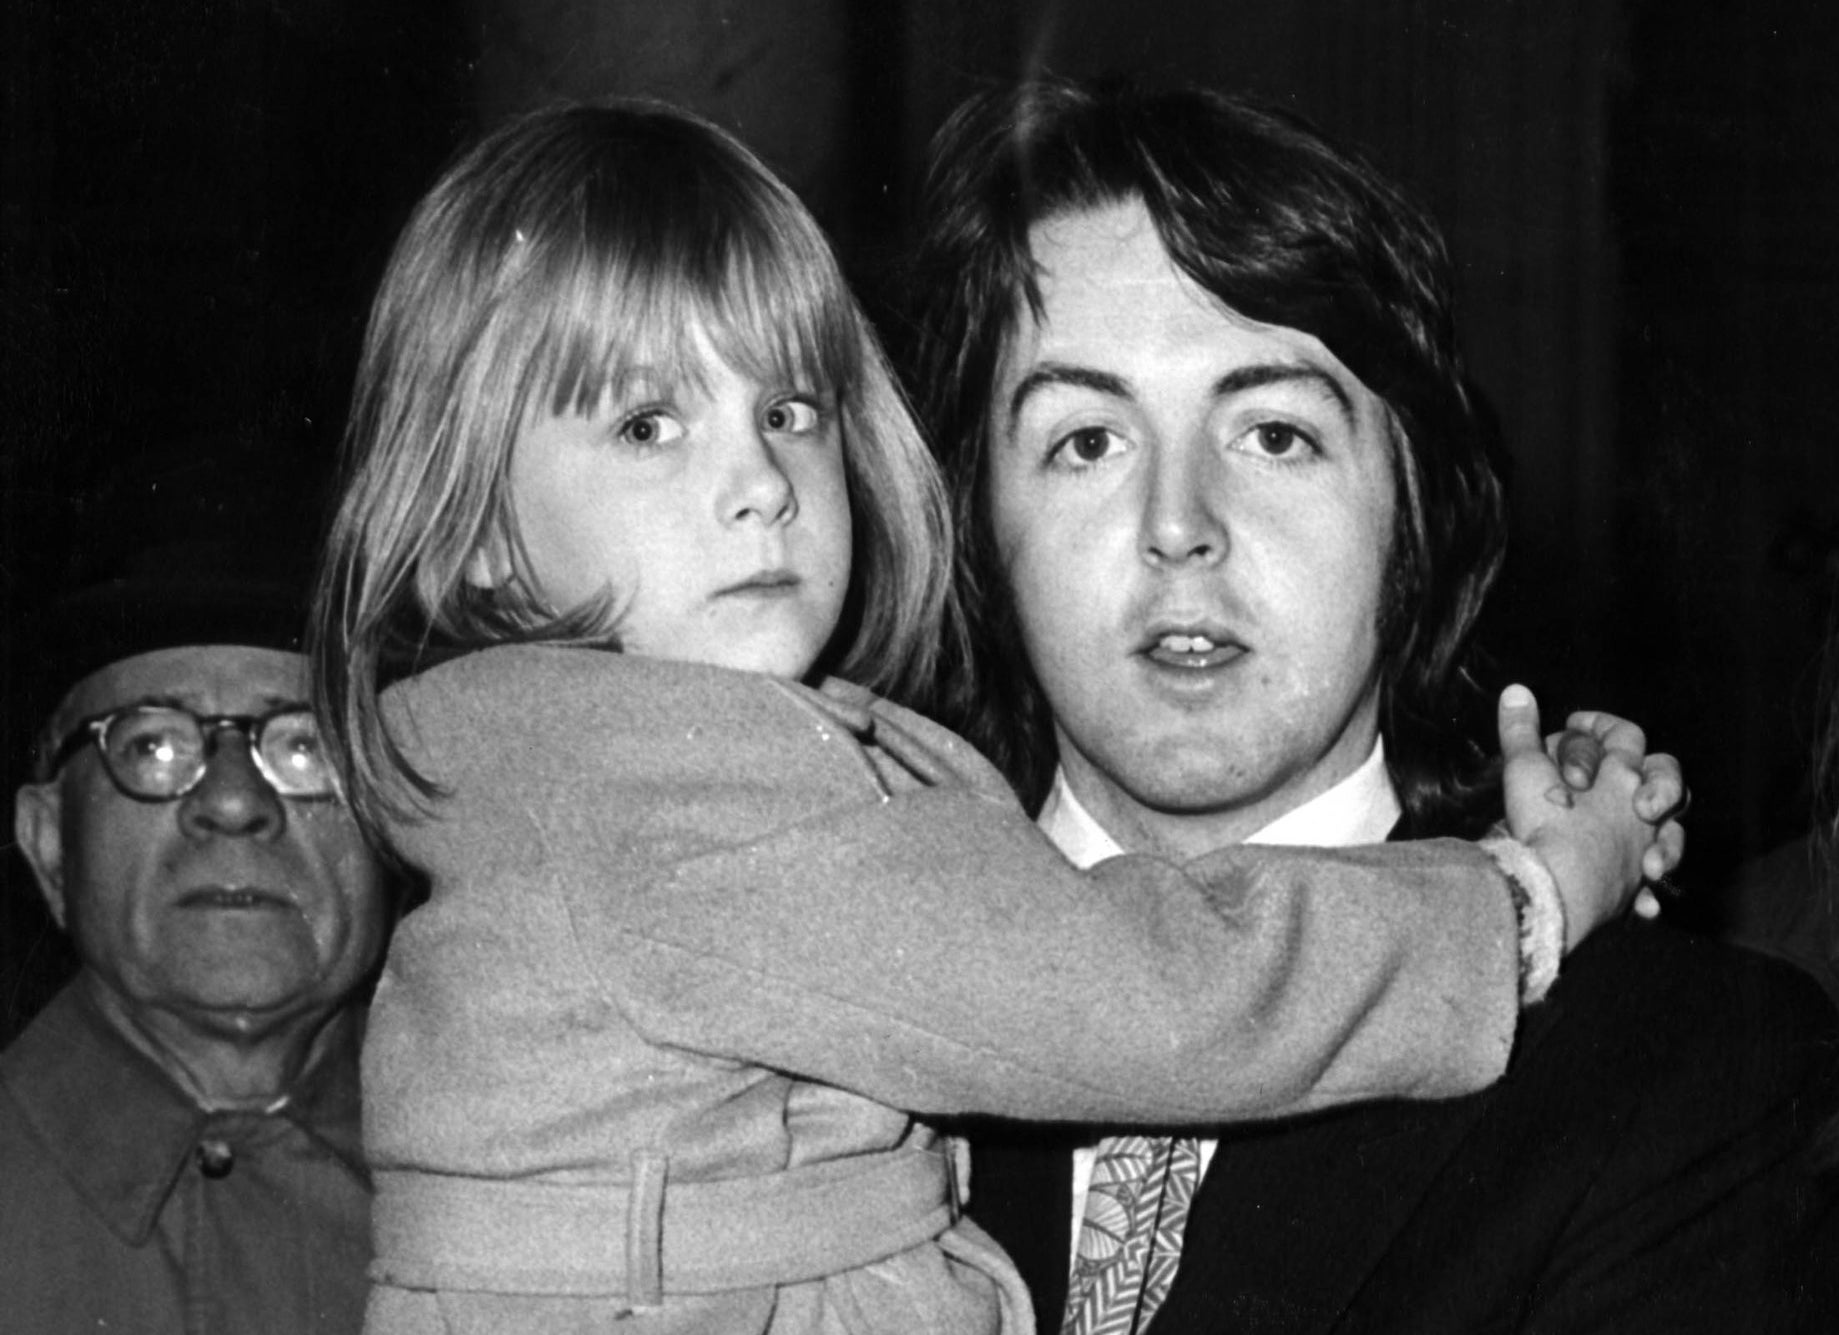 Paul McCartney holding his child stepdaughter, Heather